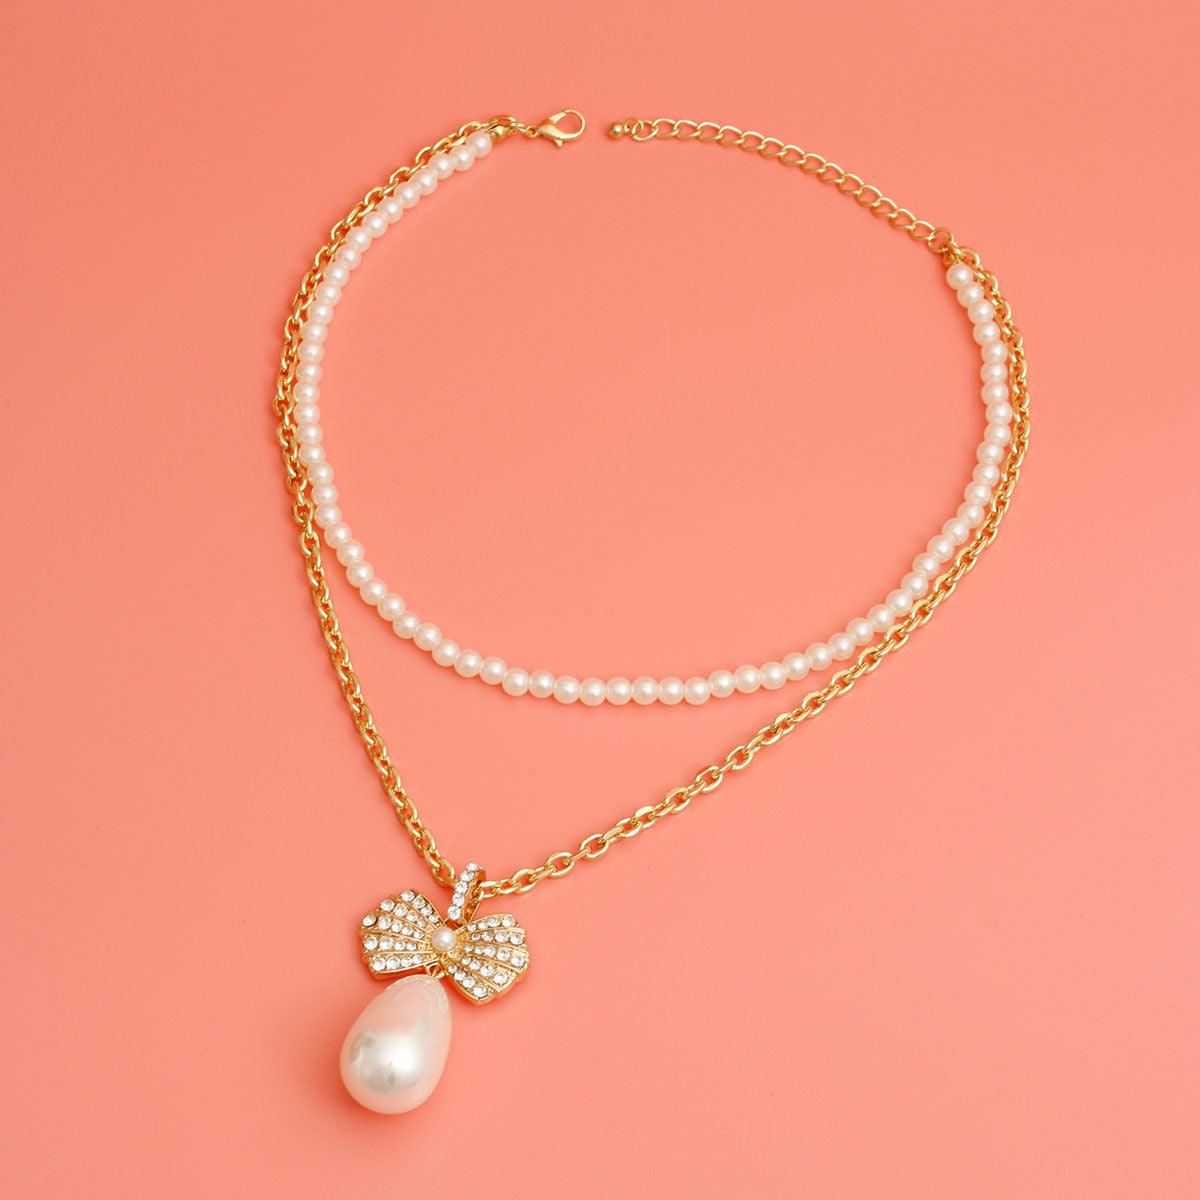 Elegant Gold Bow & Pearl Drop Pendant Necklace: Timeless Elegance for Every Occasion